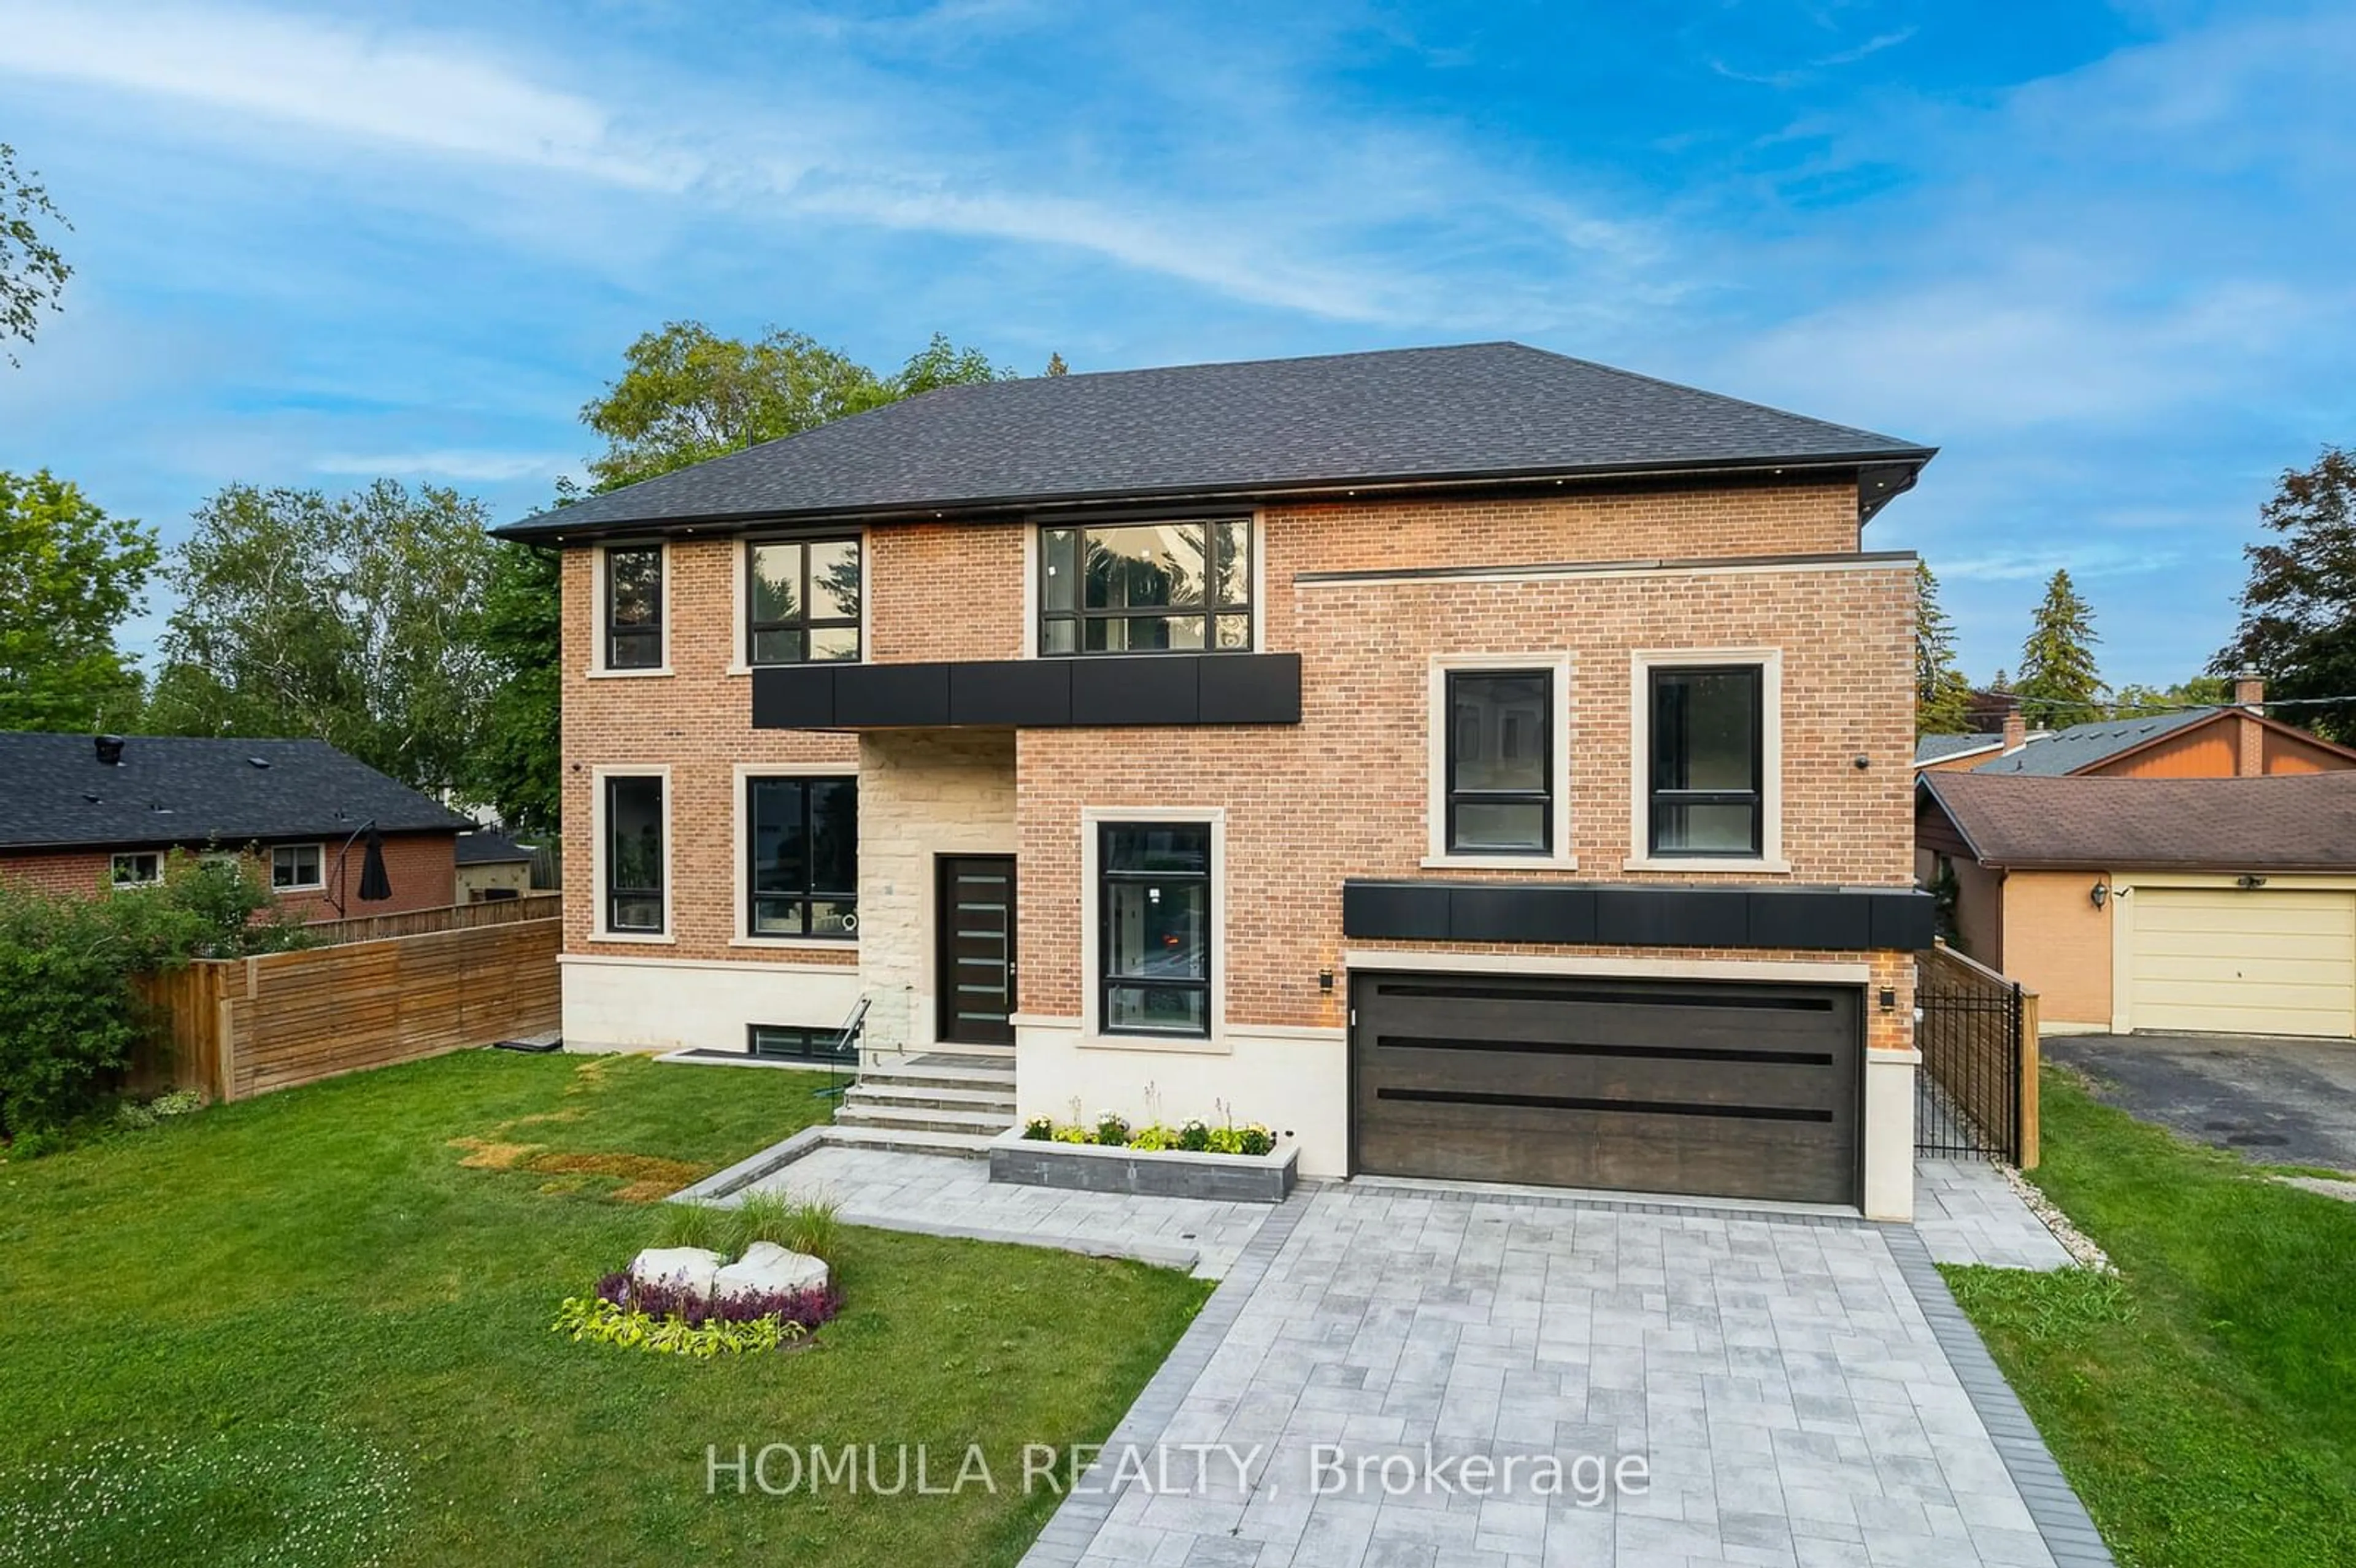 Home with brick exterior material for 45 Seaton Dr, Aurora Ontario L4G 2K2